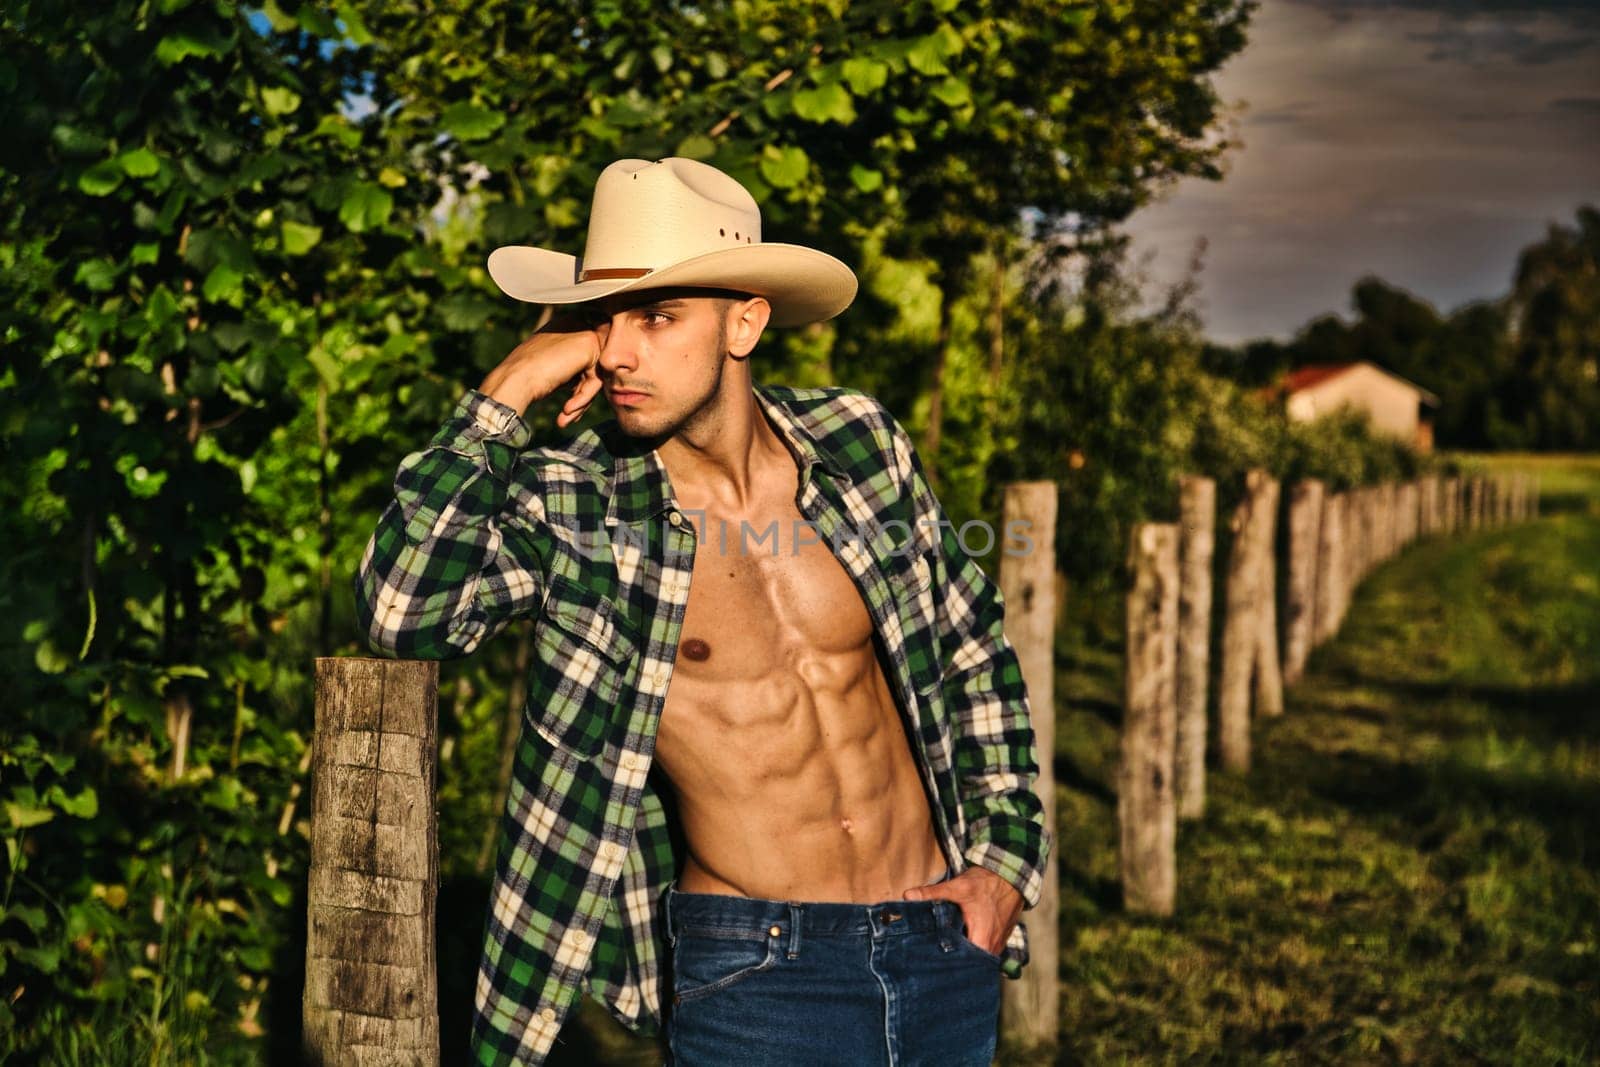 A shirtless man wearing a cowboy hat leaning on a wooden fence post